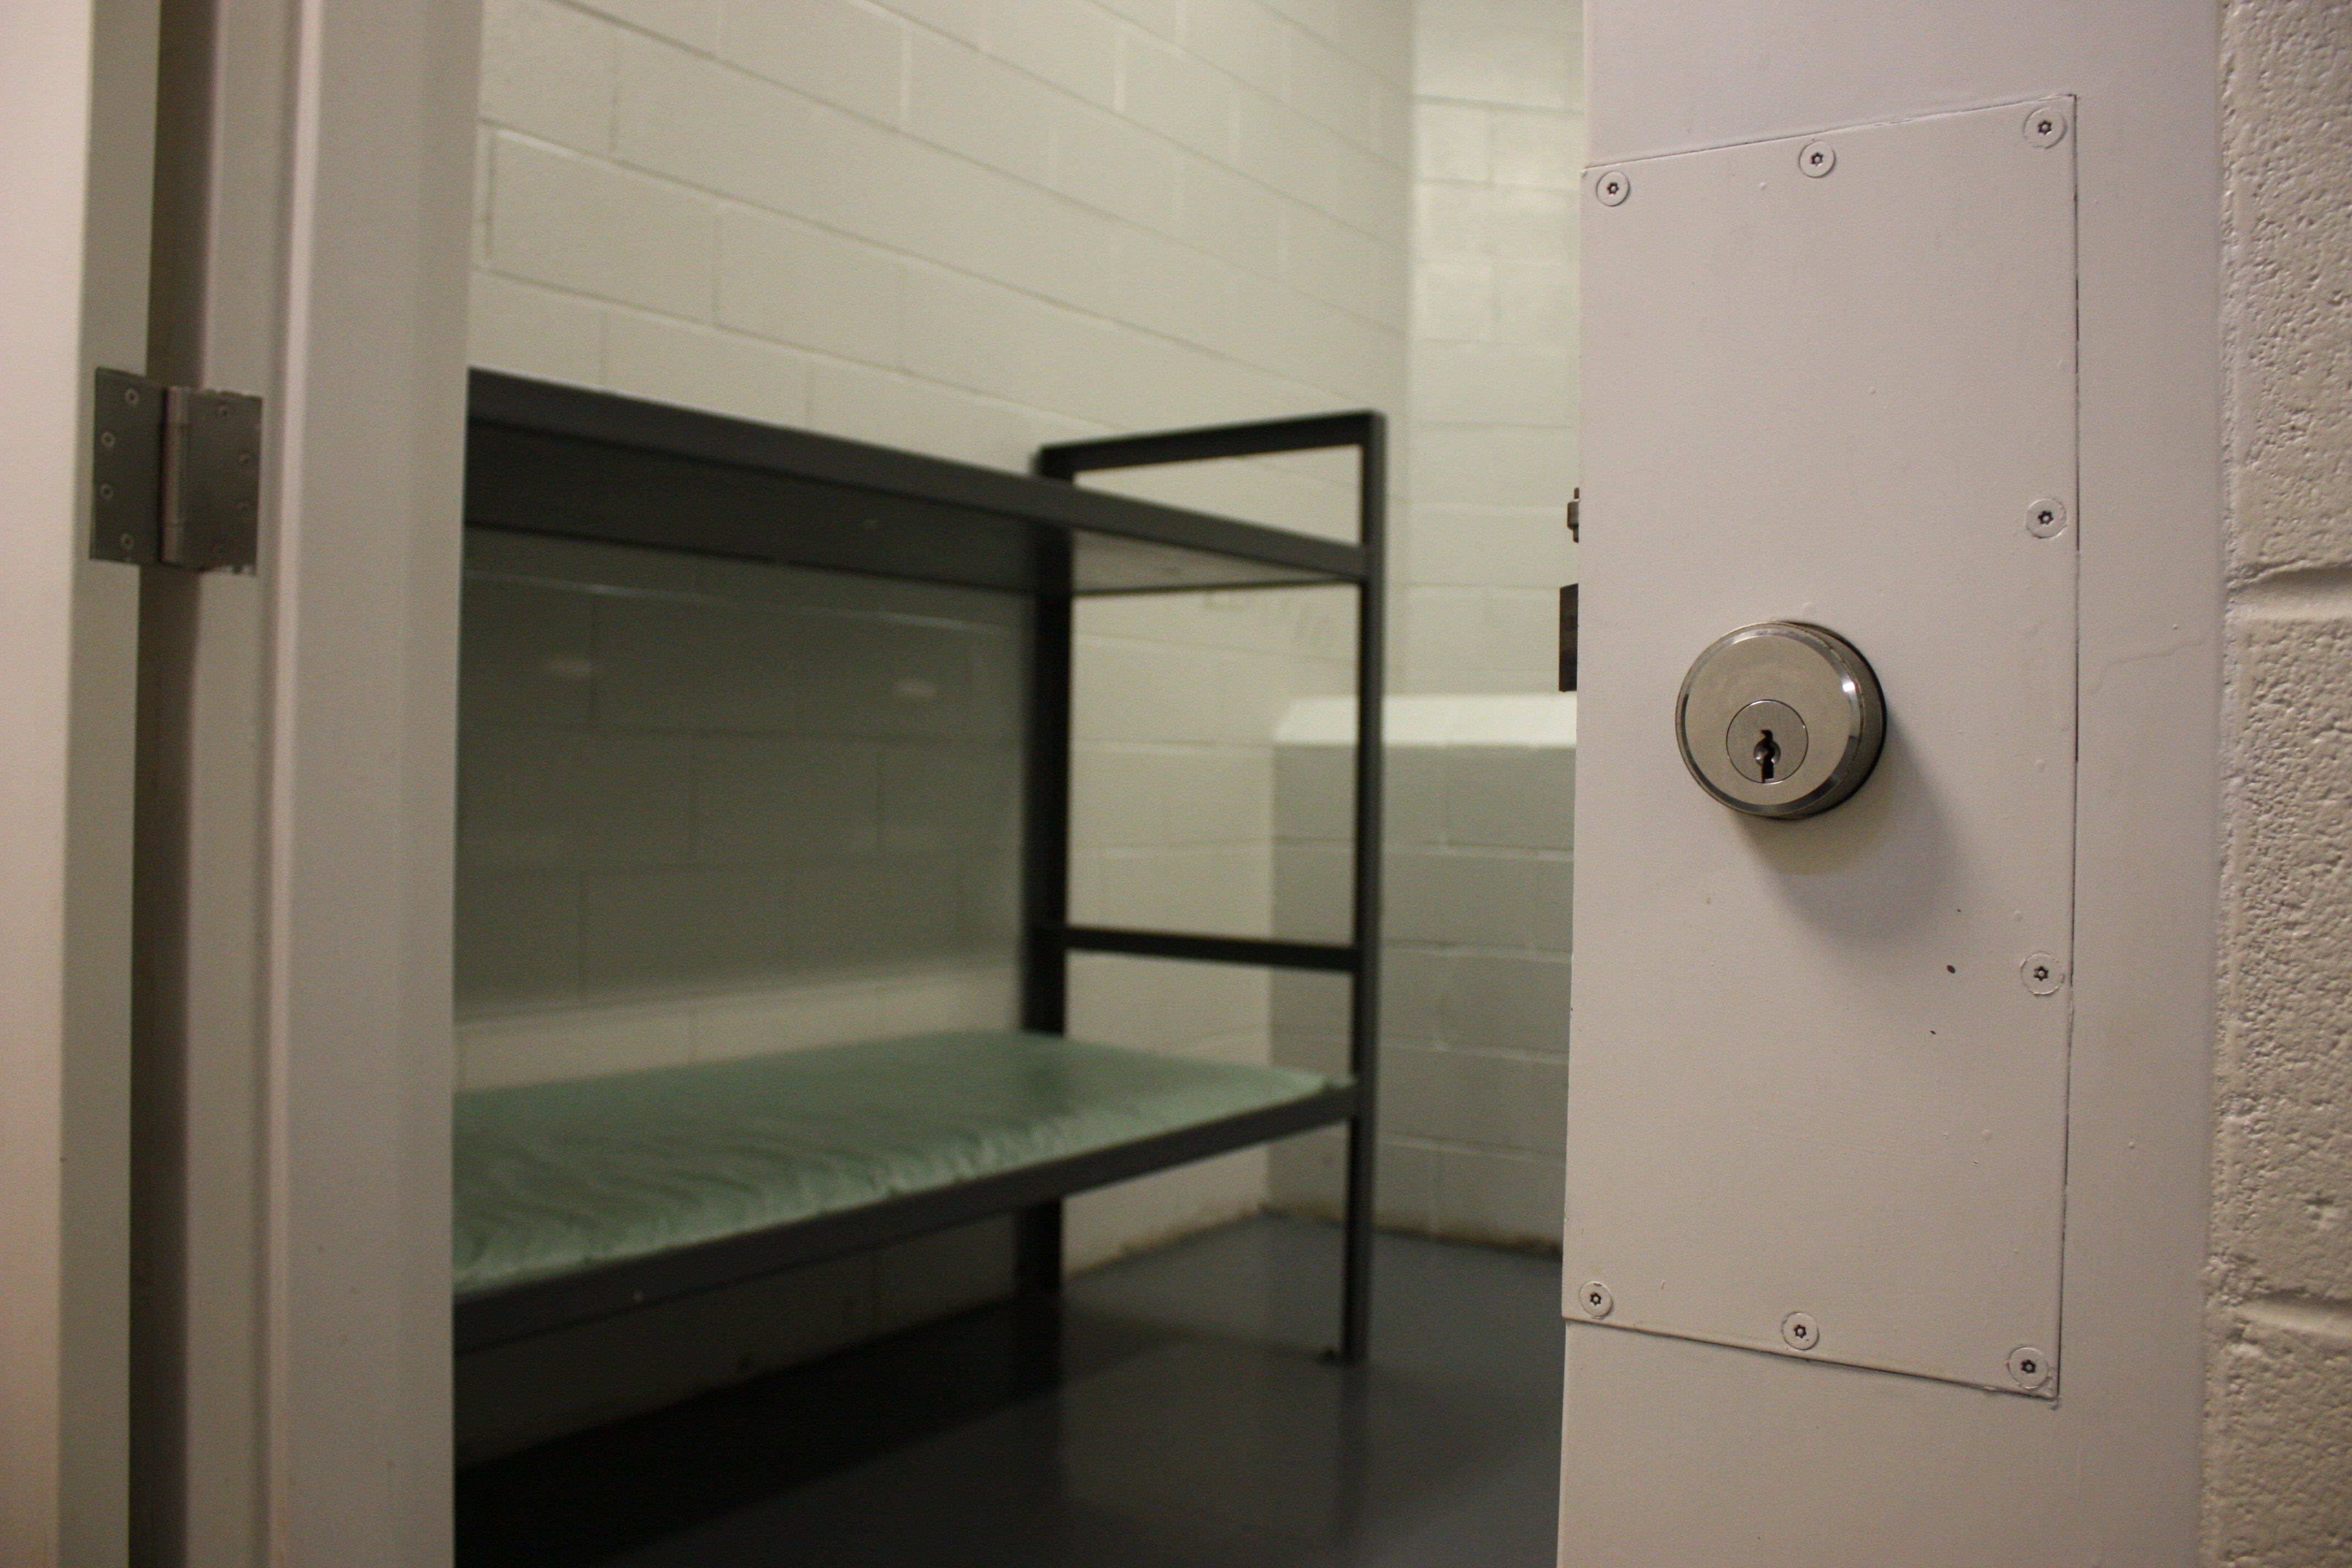 Shots of empty jail cell, prison